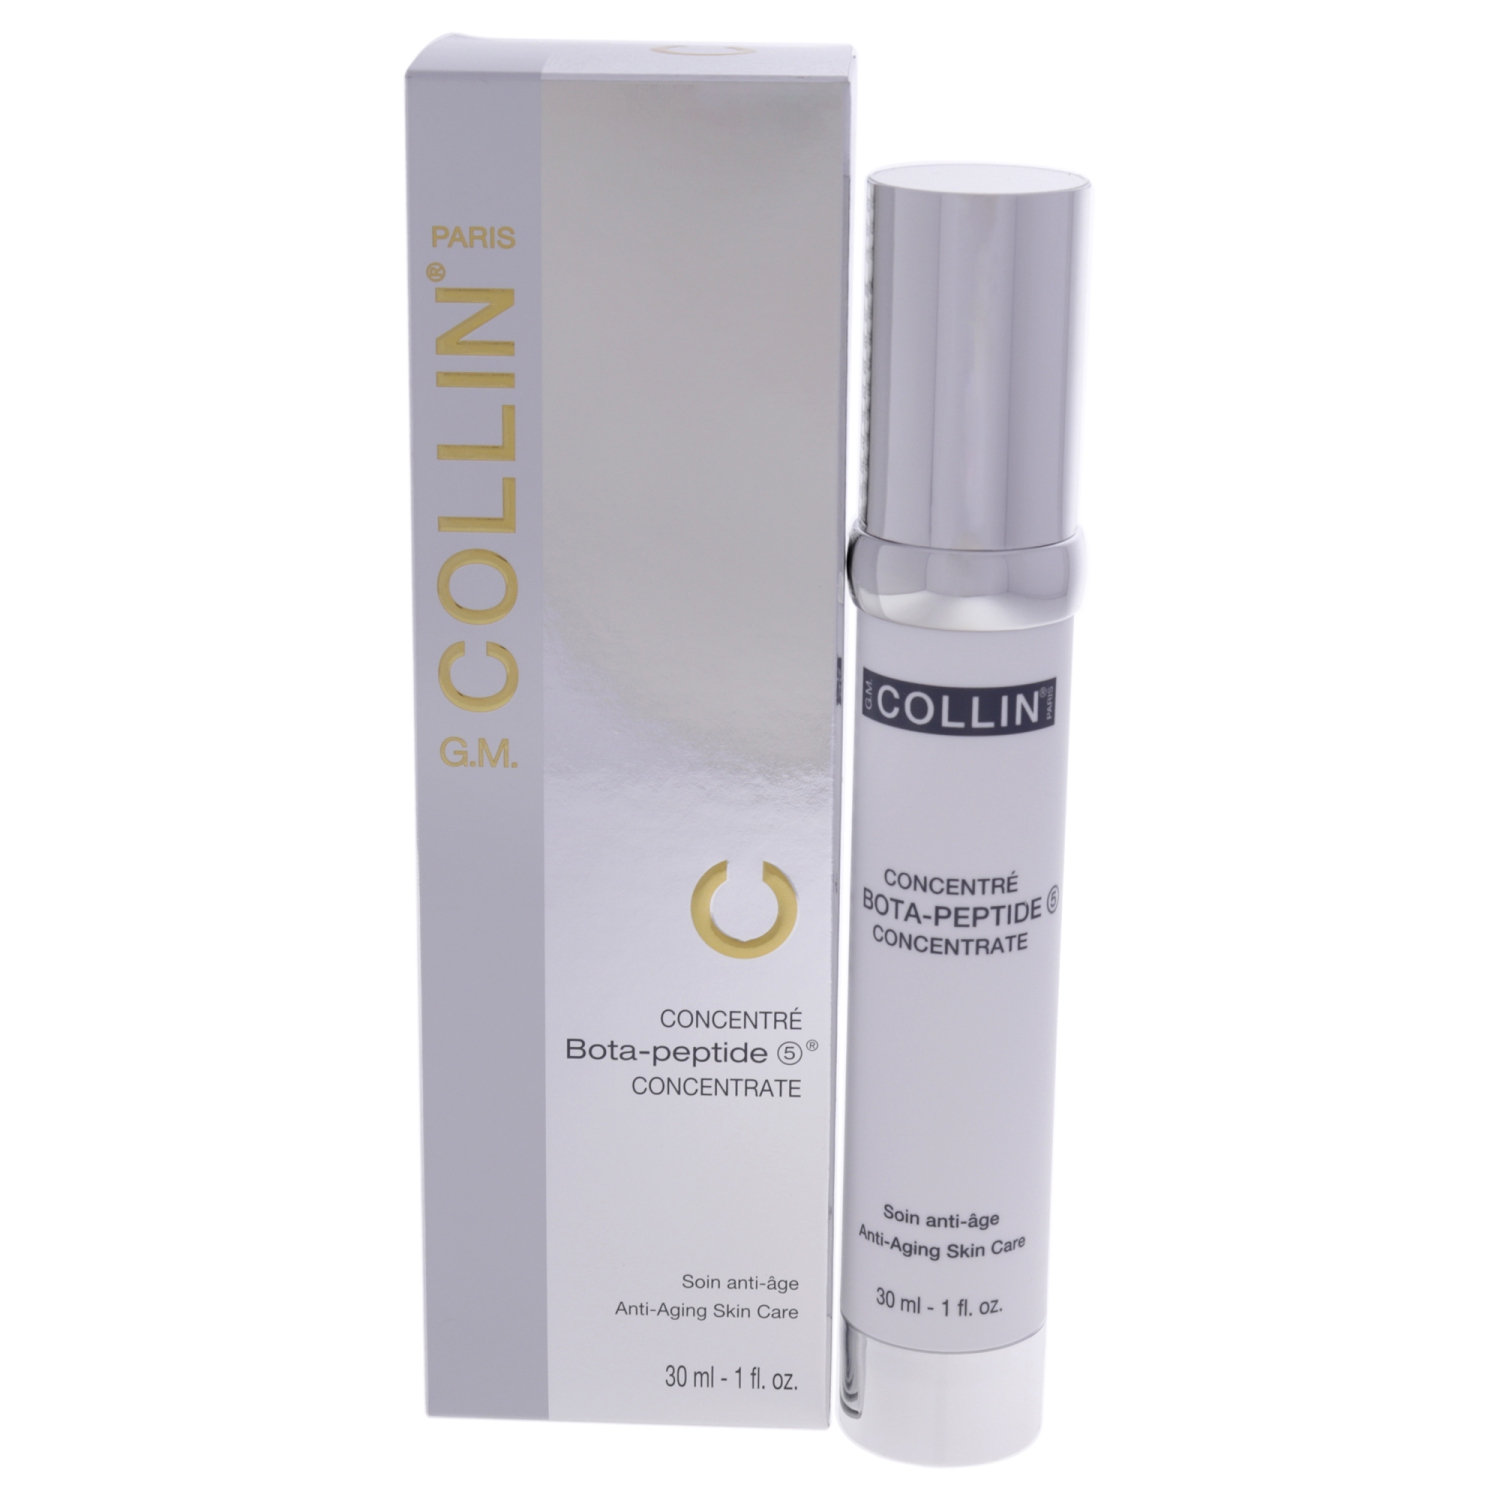 Bota-Peptide 5 Concentrate by G.M. Collin for Unisex - 1 oz Concentrate